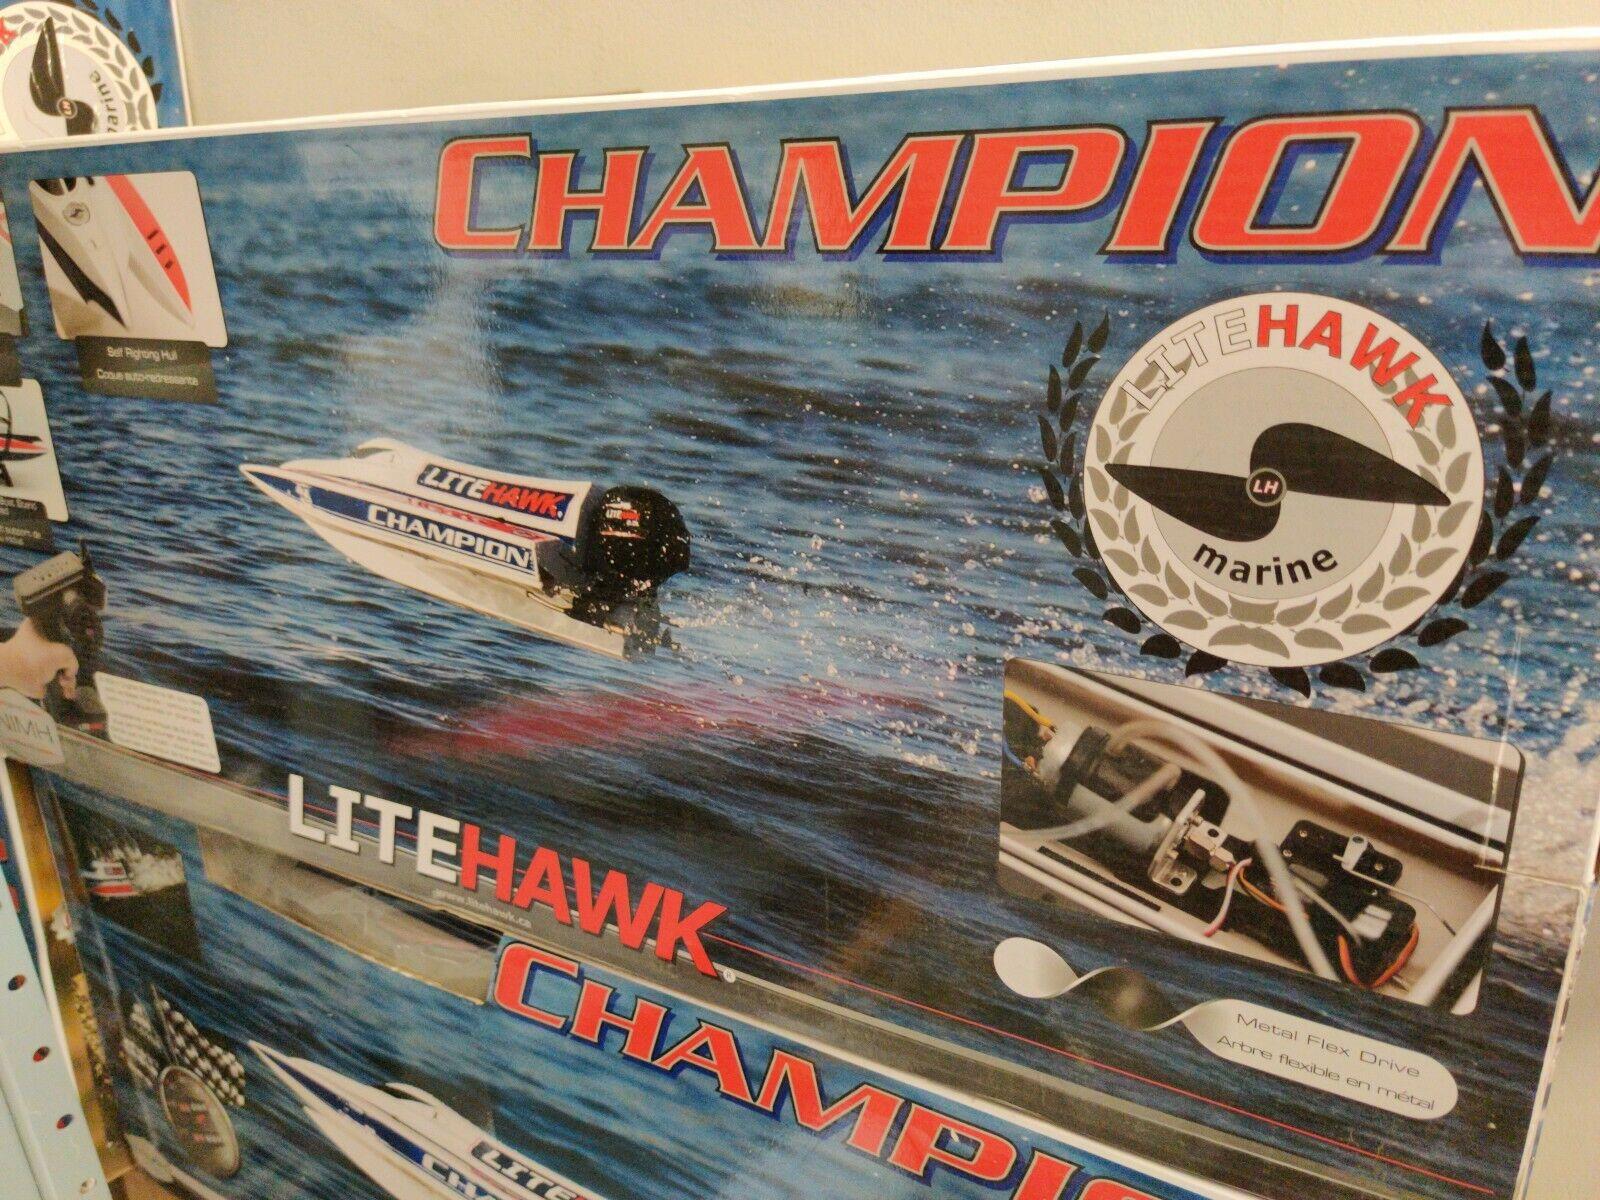 Litehawk Champ Rc Boat: Perfect for all levels of remote control boat enthusiasts.